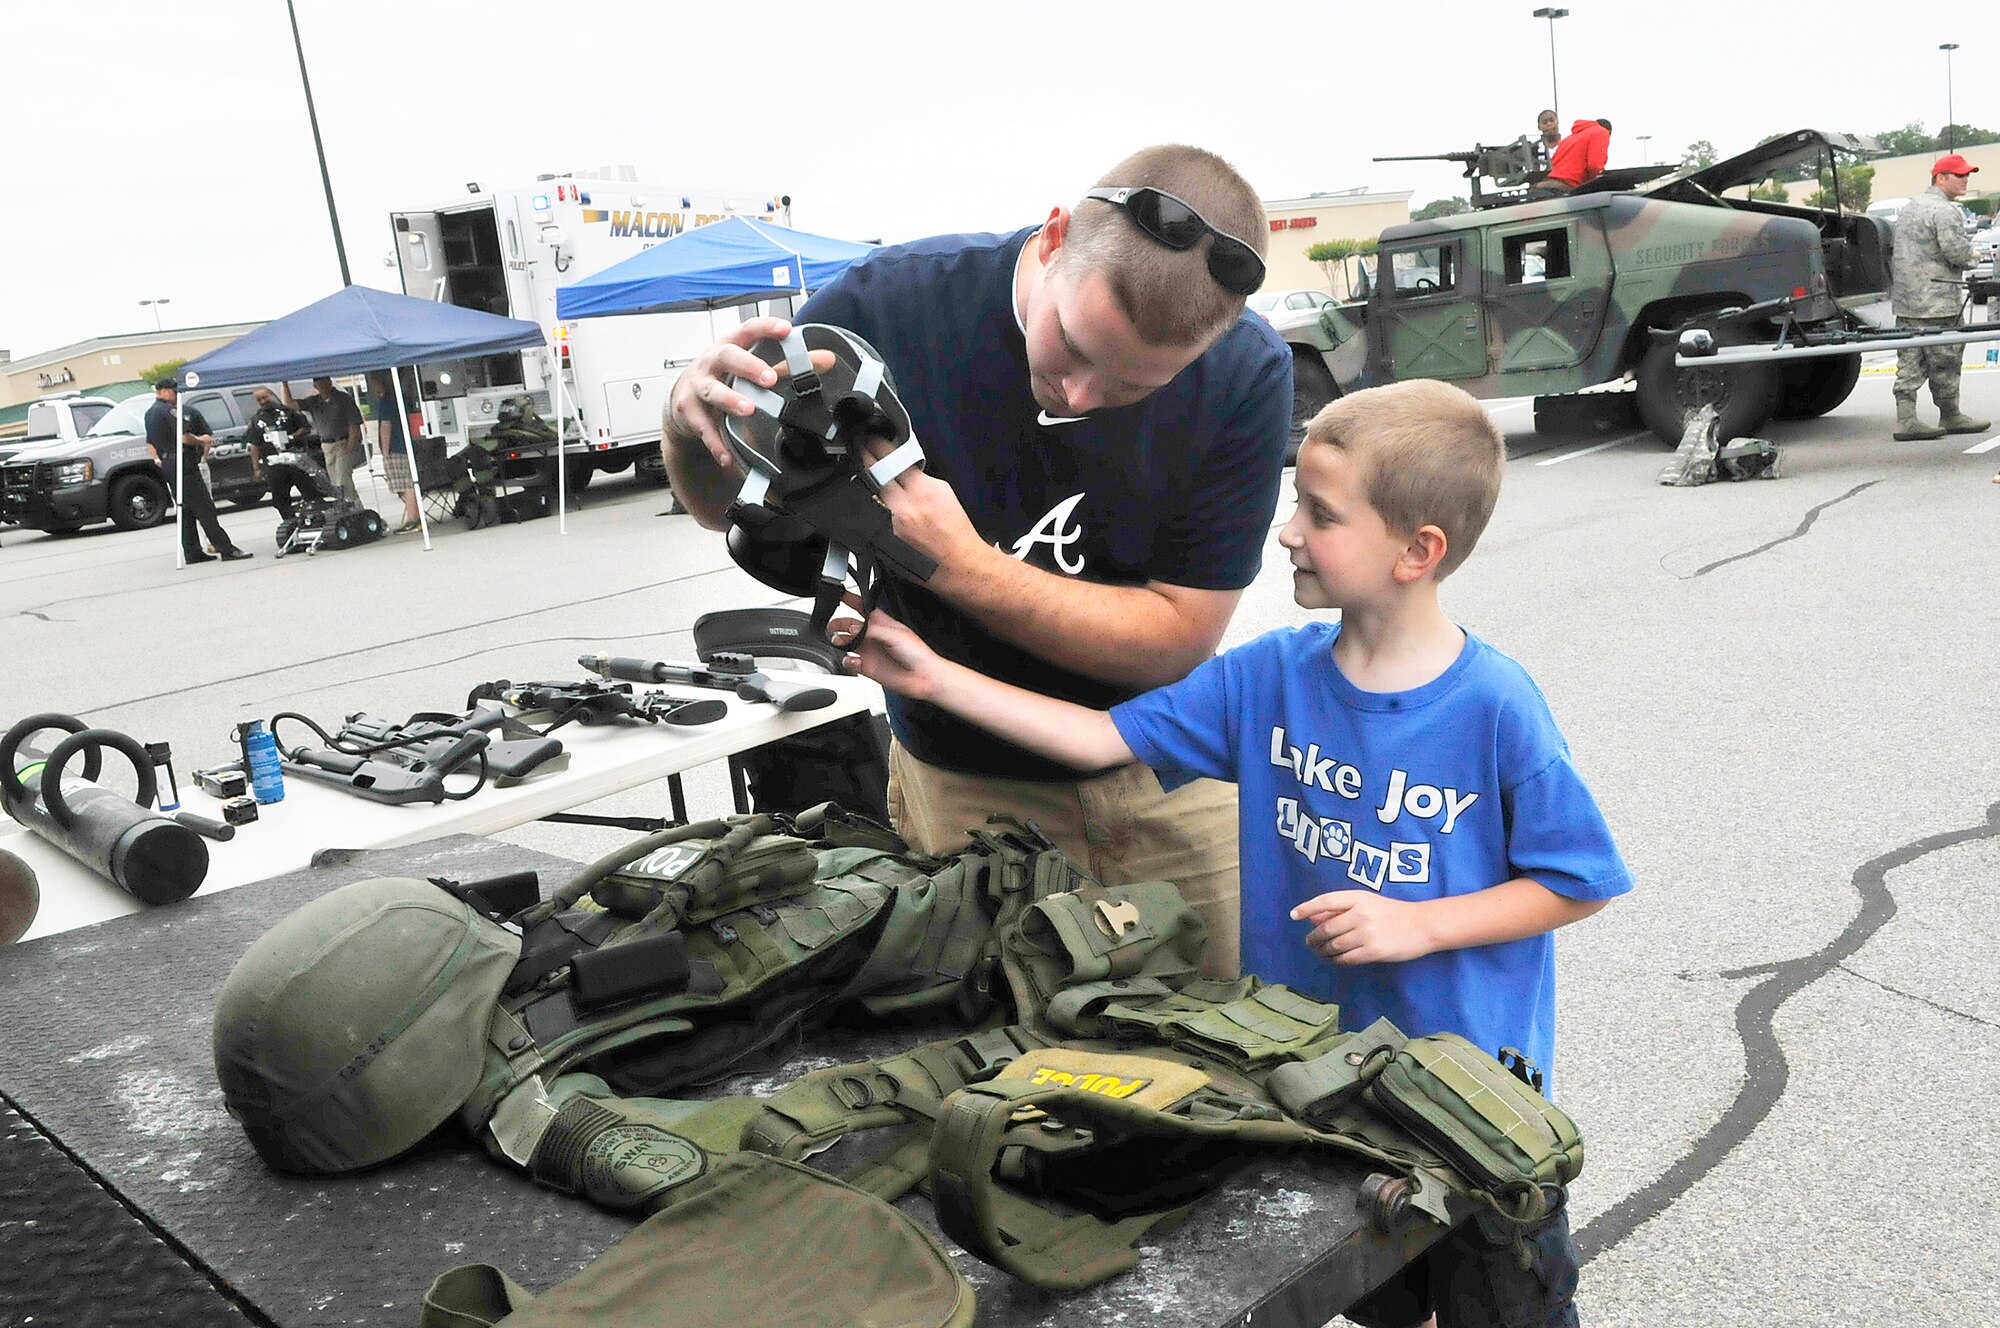 Rob Belknap and his son Braden, 7, look at some of the equipment used by WRPD SWAT team. Police Departments from Macon, Warner Robins, Centerville, Byron and Robins Air Force Base were represented at a display Saturday at Home Depot for National Police Week. (U. S. Air Force photo by Sue Sapp)